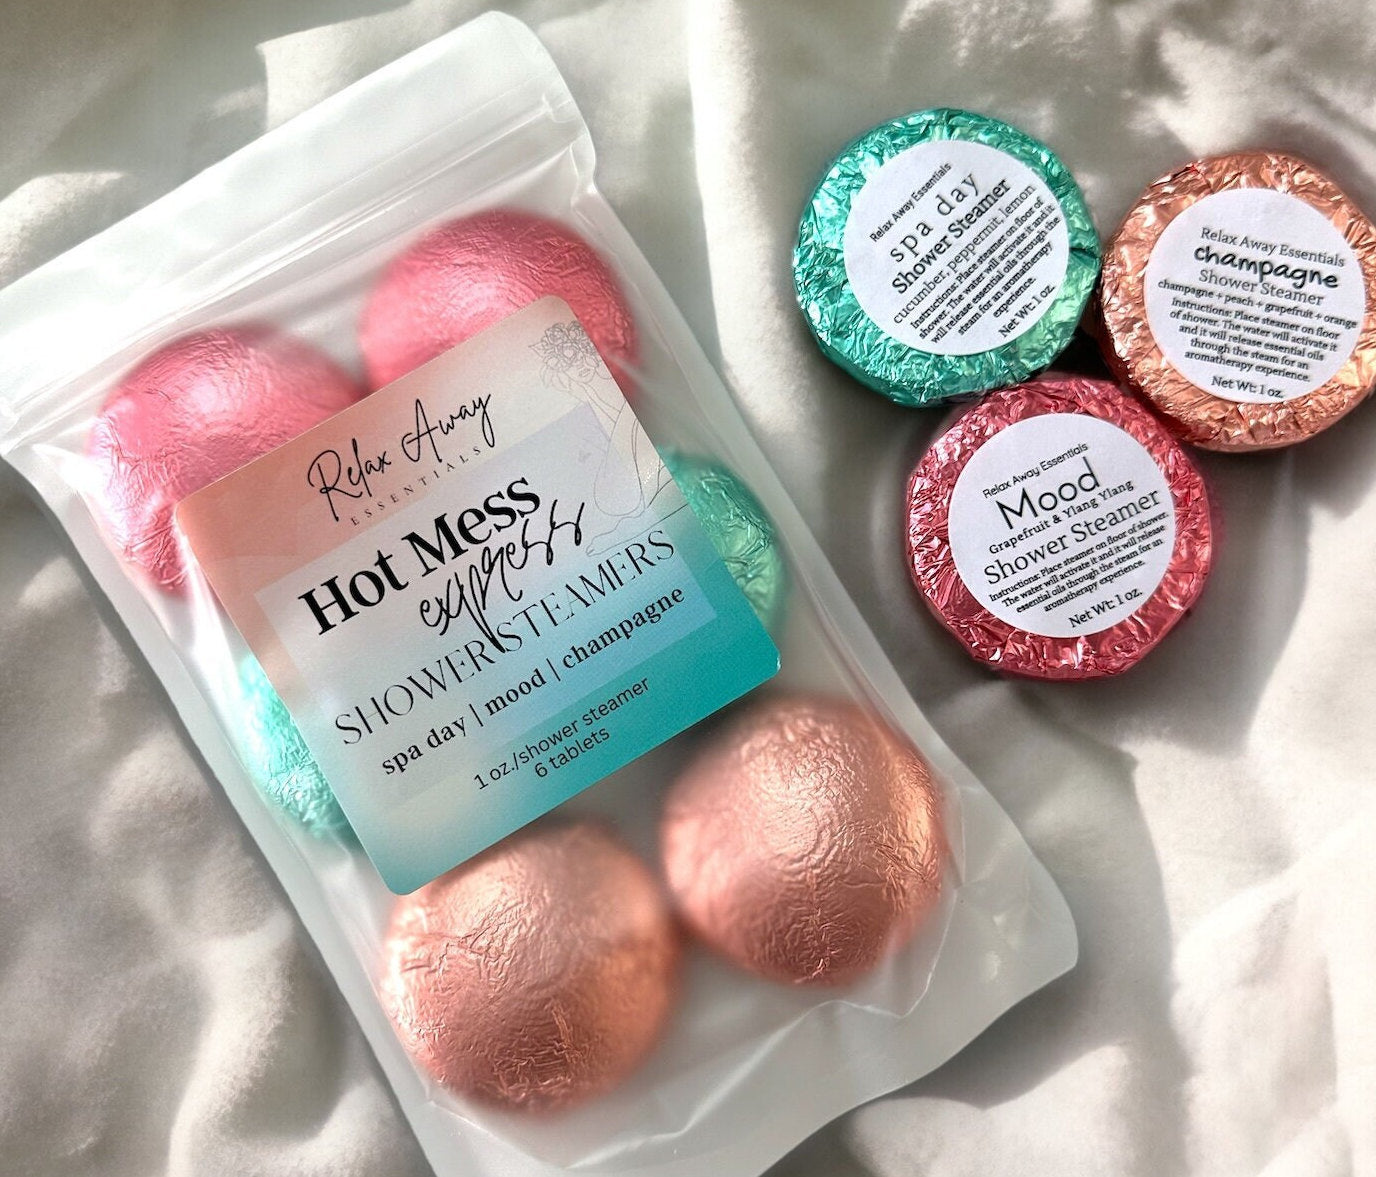 Hot Mess Express Shower Steamers | 6 Pack | Variety Pack | Aromatherapy | Gift For Her | Handmade gift